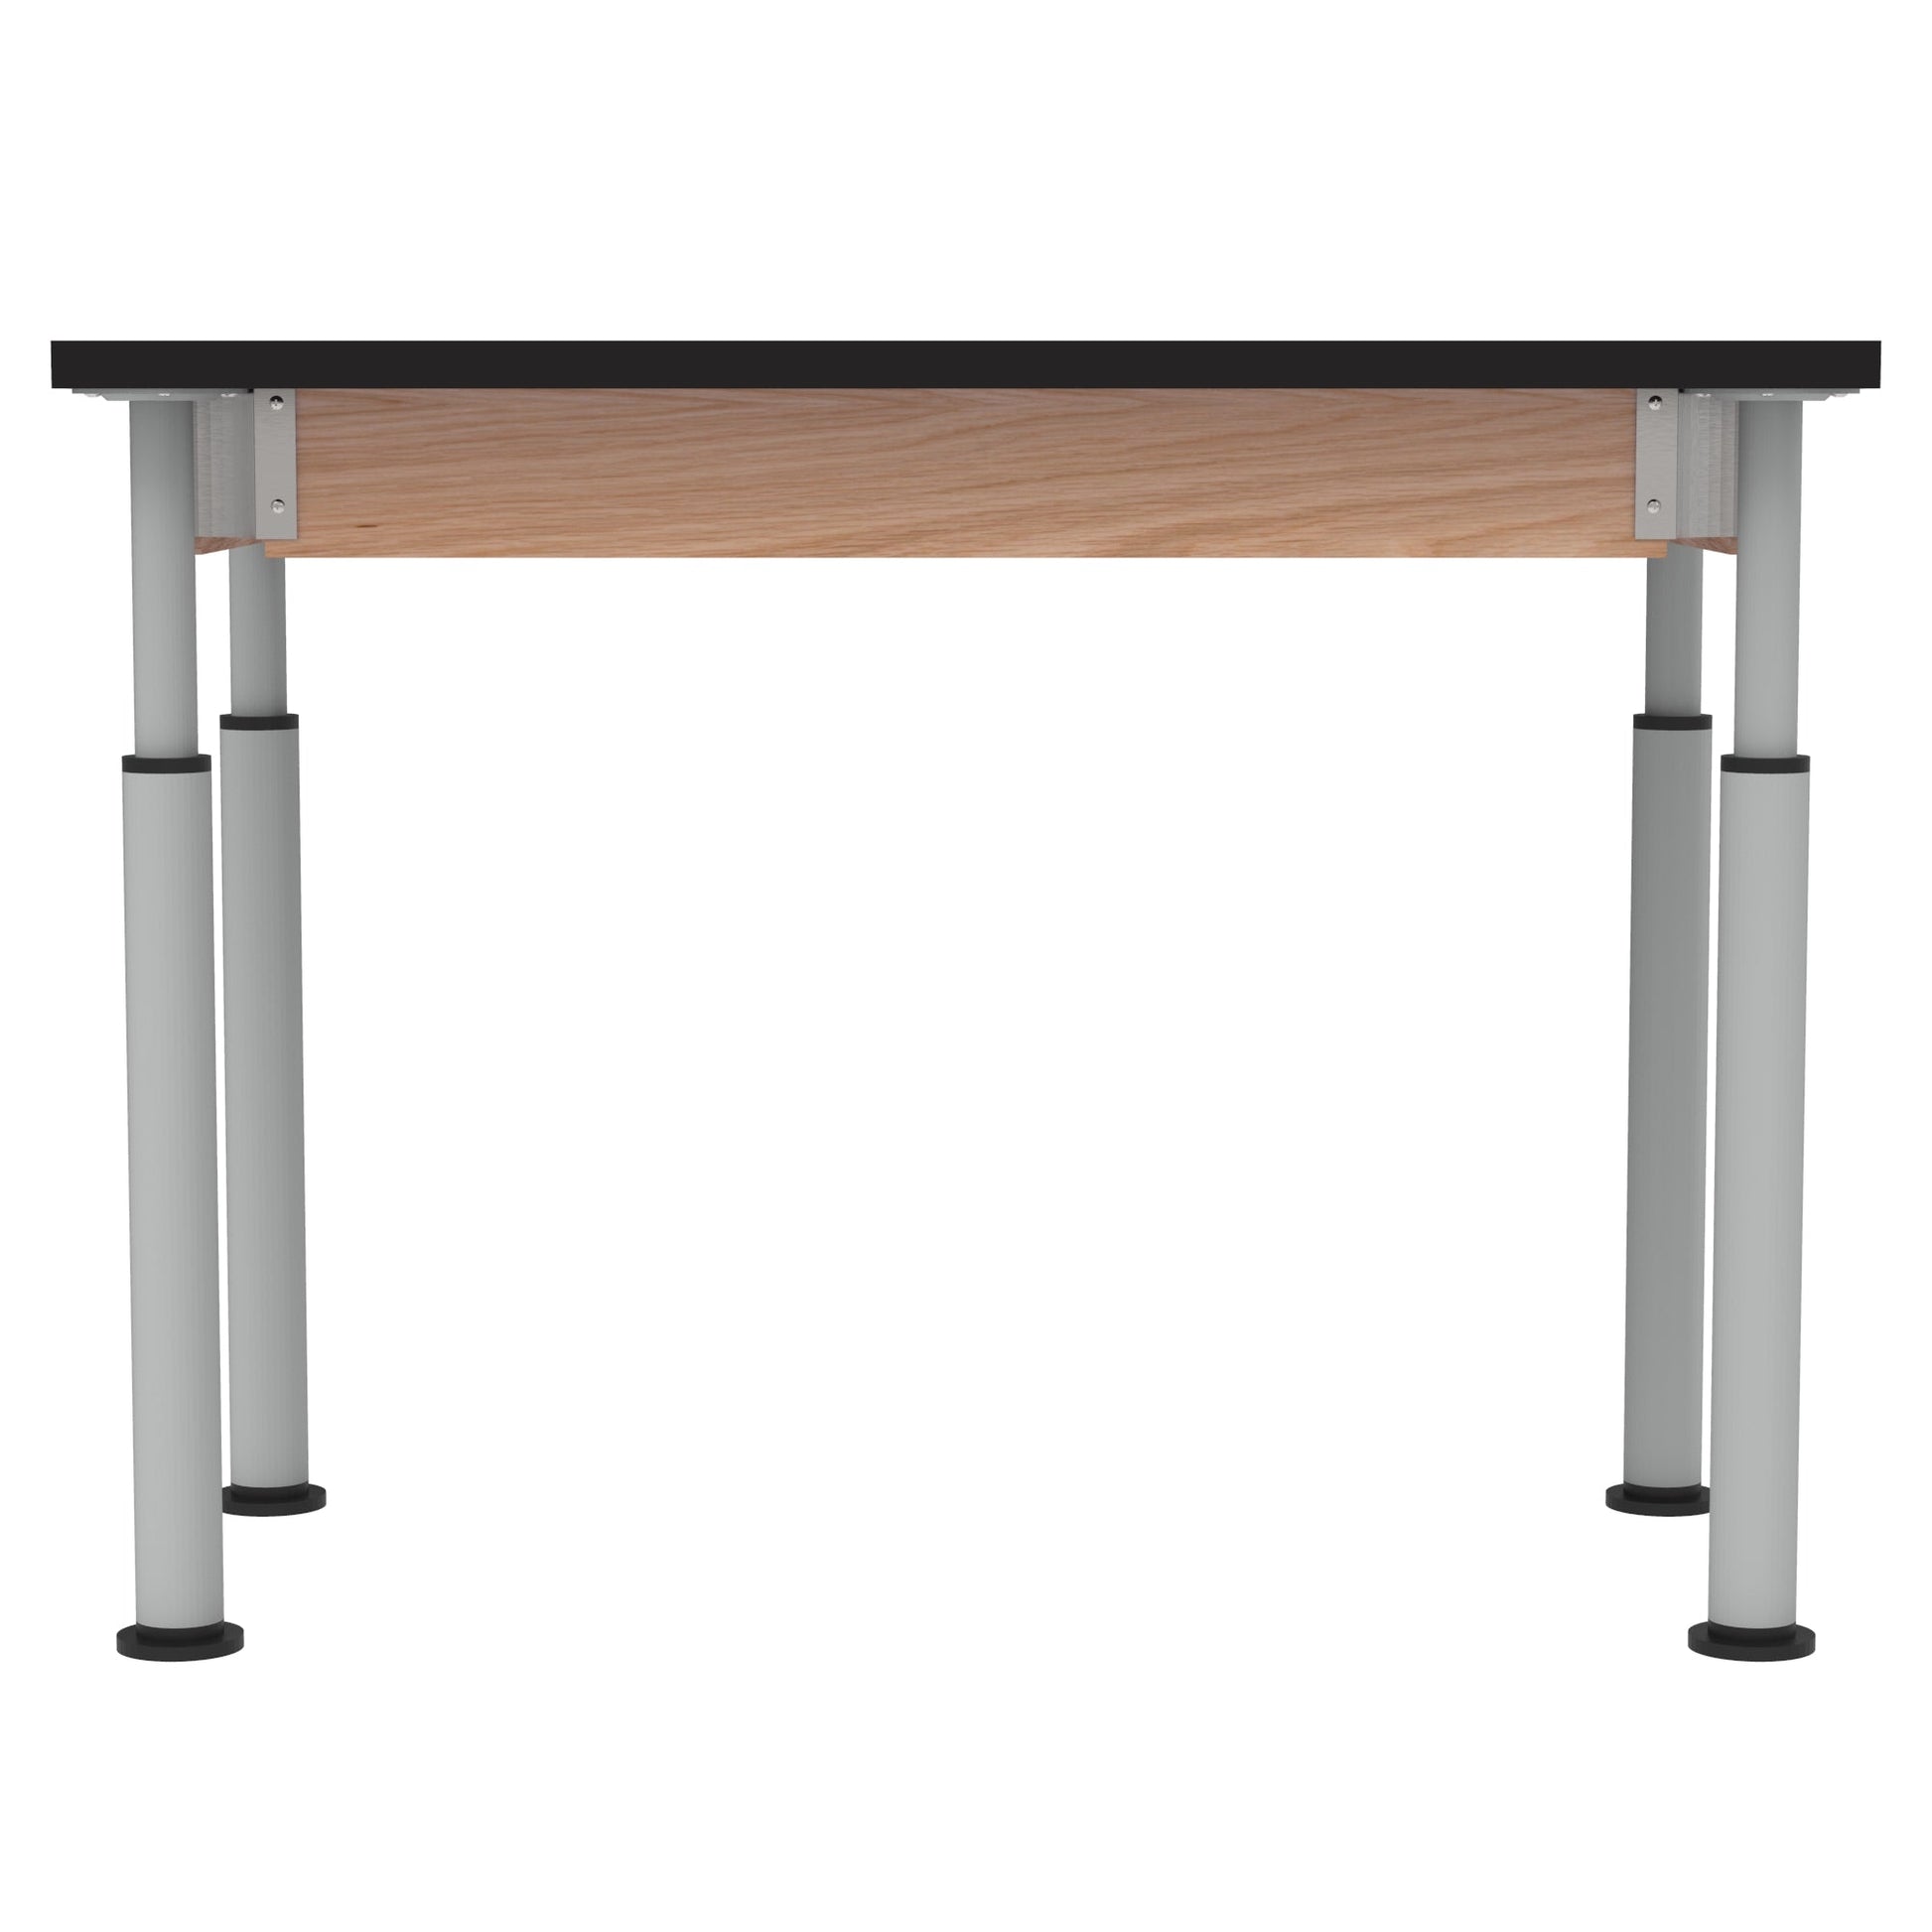 Diversified Woodcrafts Adjustable-Height Table - 60" W x 30" D - SchoolOutlet